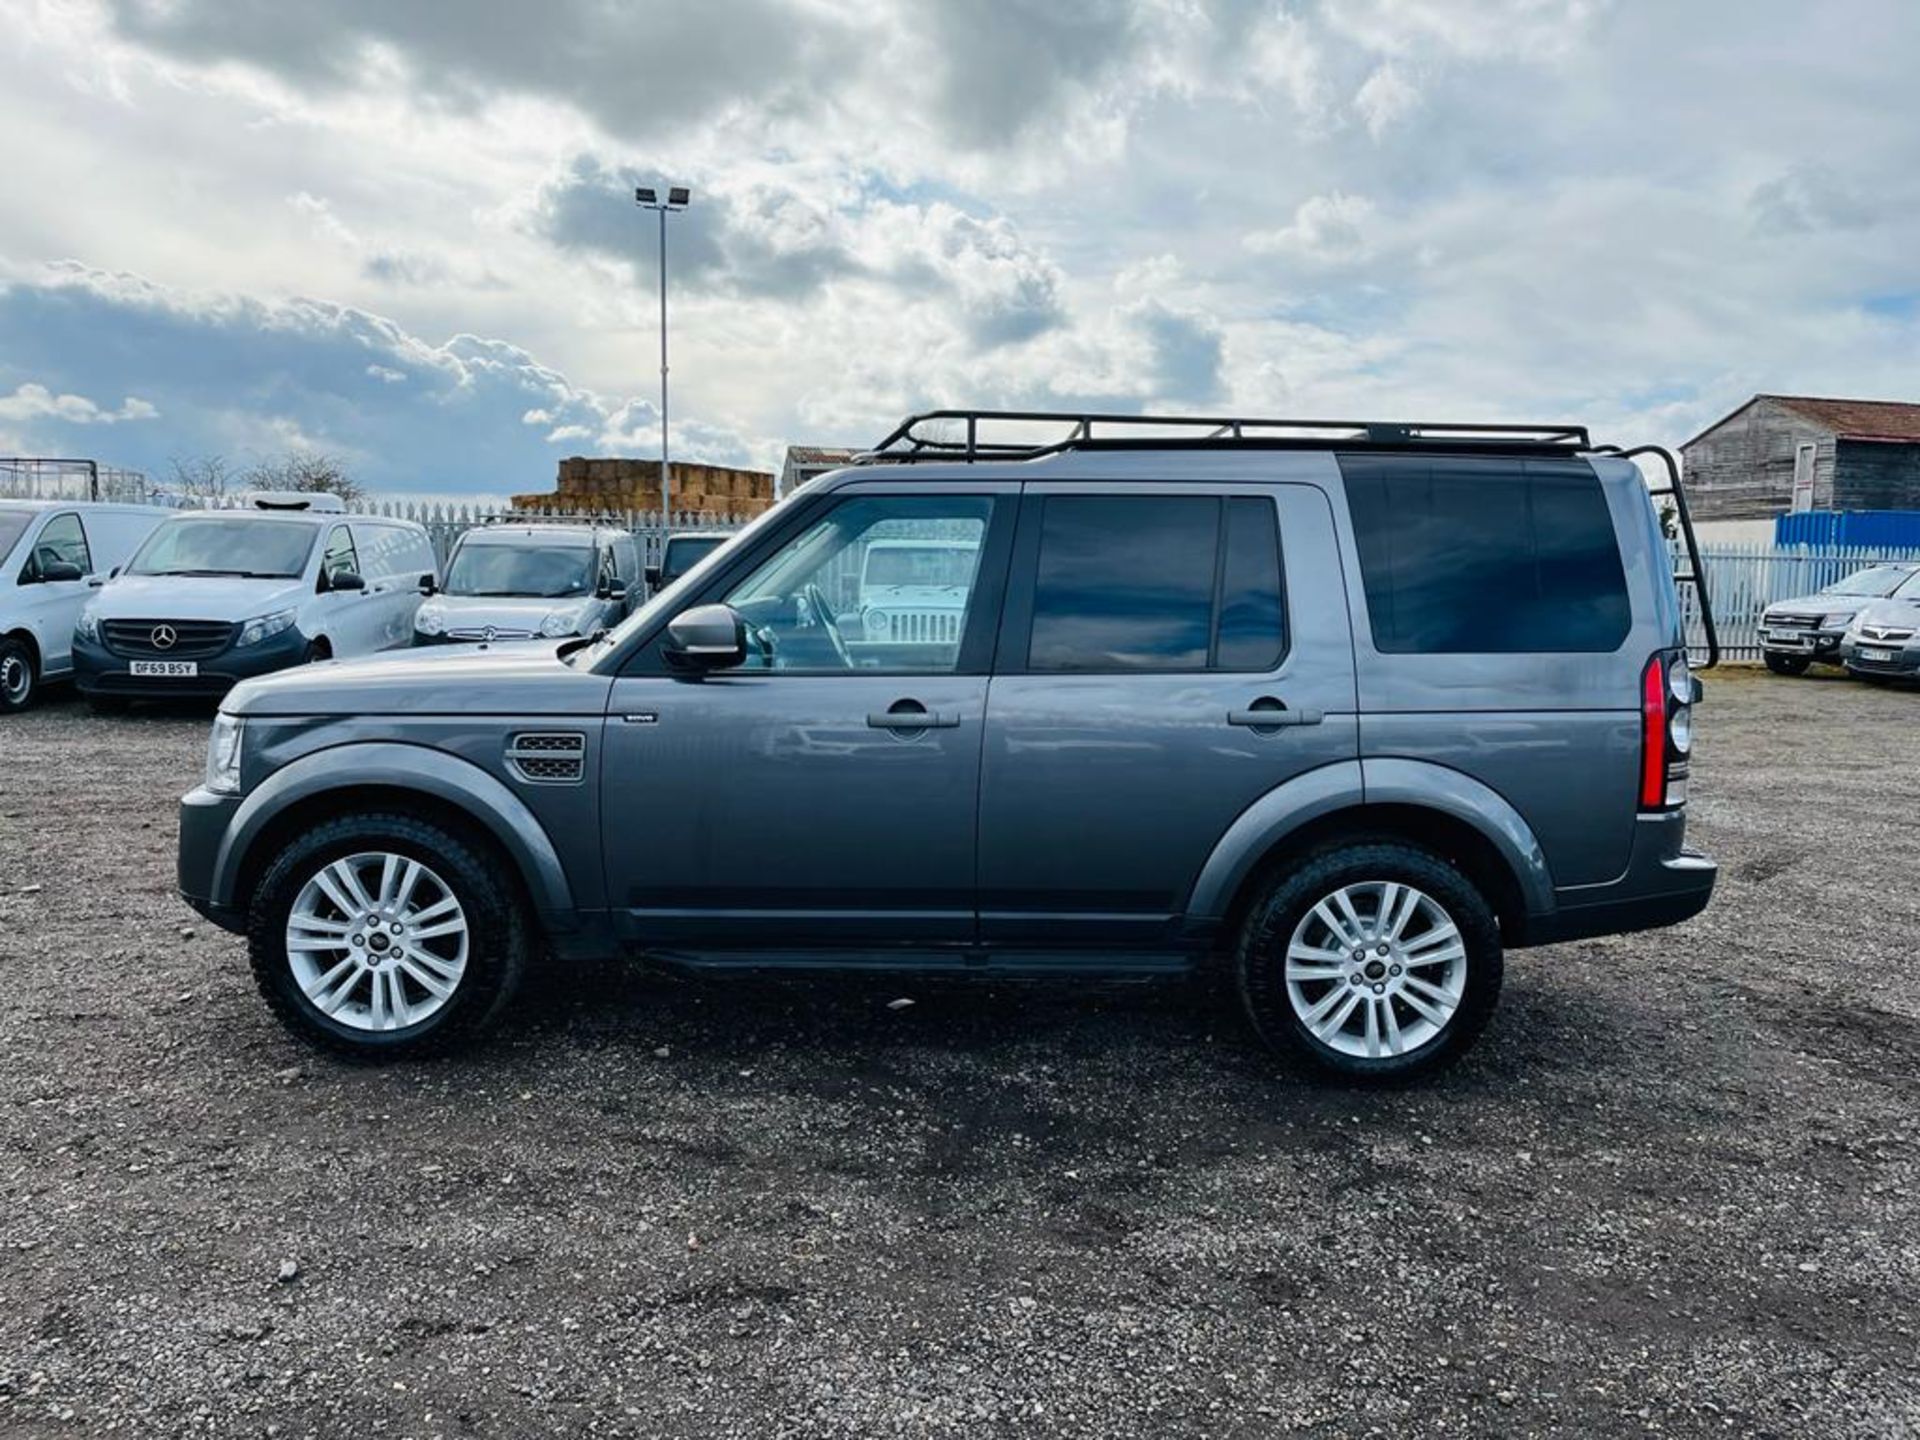 **ON SALE**Land Rover Discovery 3.0 SDV6 Auto SE 2016 '65 Reg' Sat Nav - 4WD - A/C -Only 97214 Miles - Image 4 of 26